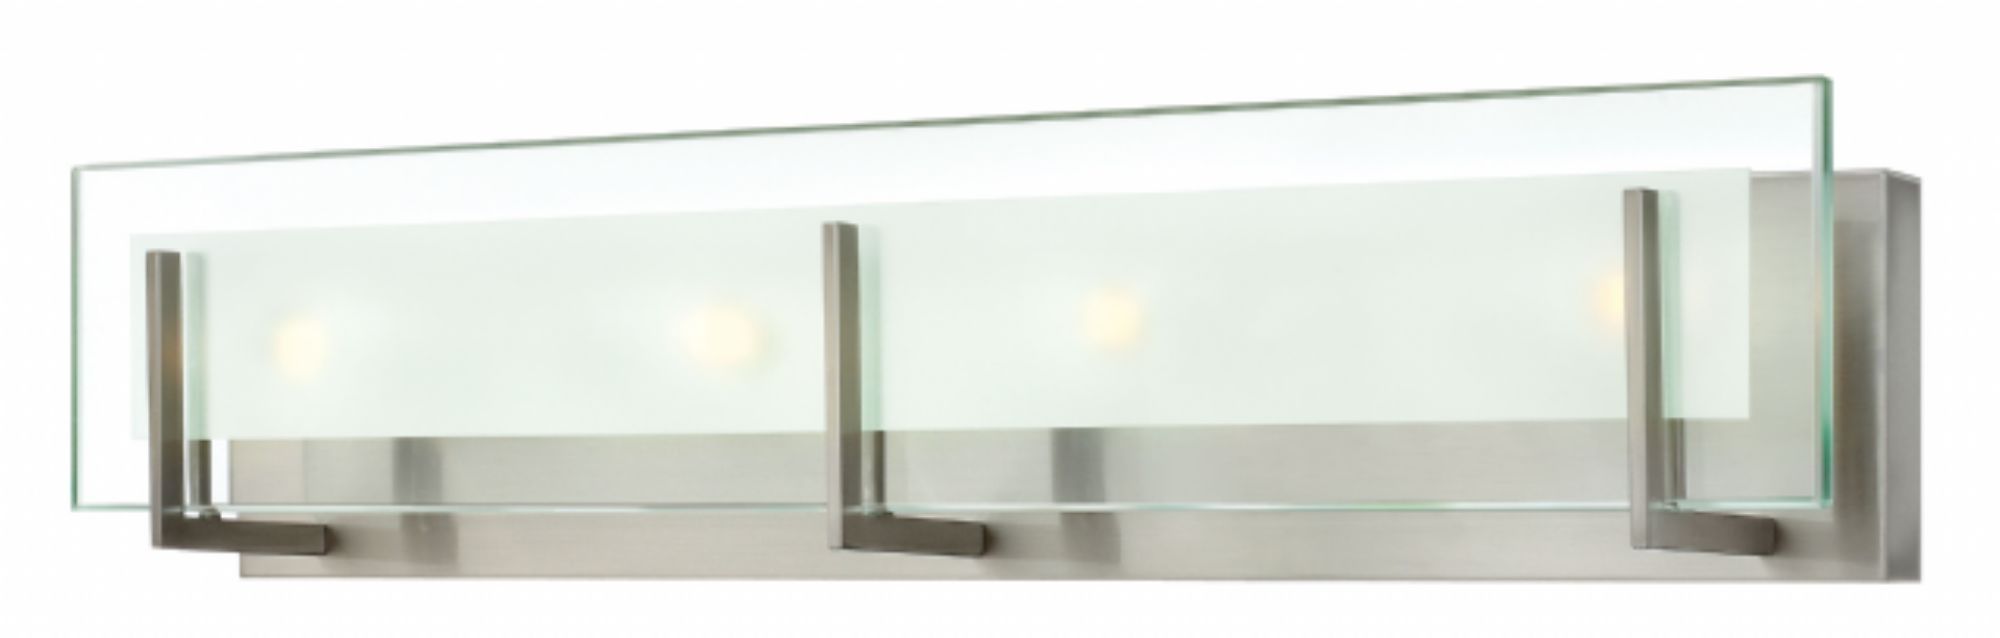 Brushed Nickel Latitude > Interior Wall Mount Throughout Contemporary Hinkley Lighting (View 7 of 15)